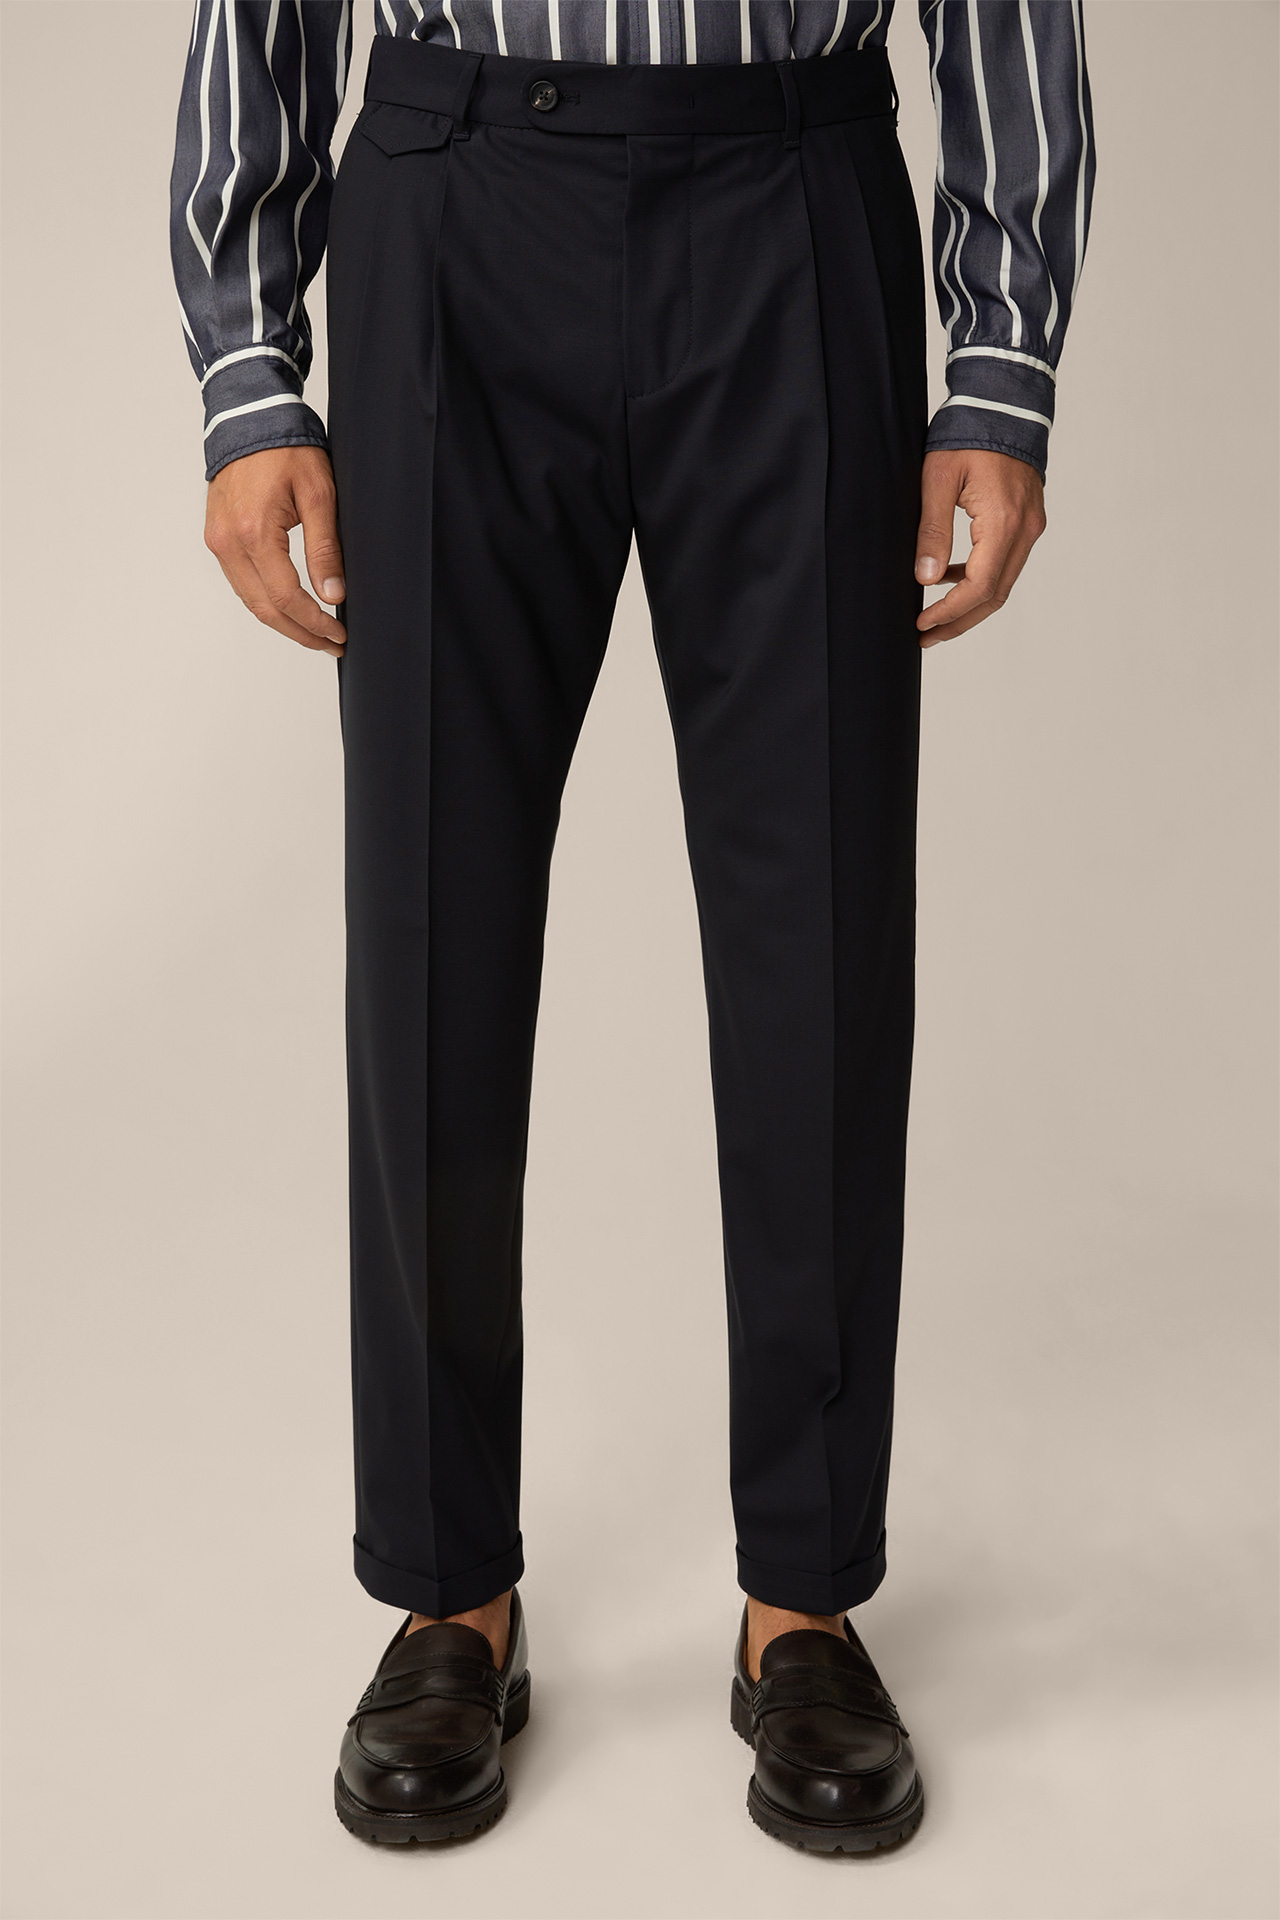 Serpo Modular Trousers with Pleats and Turn-Ups in Navy